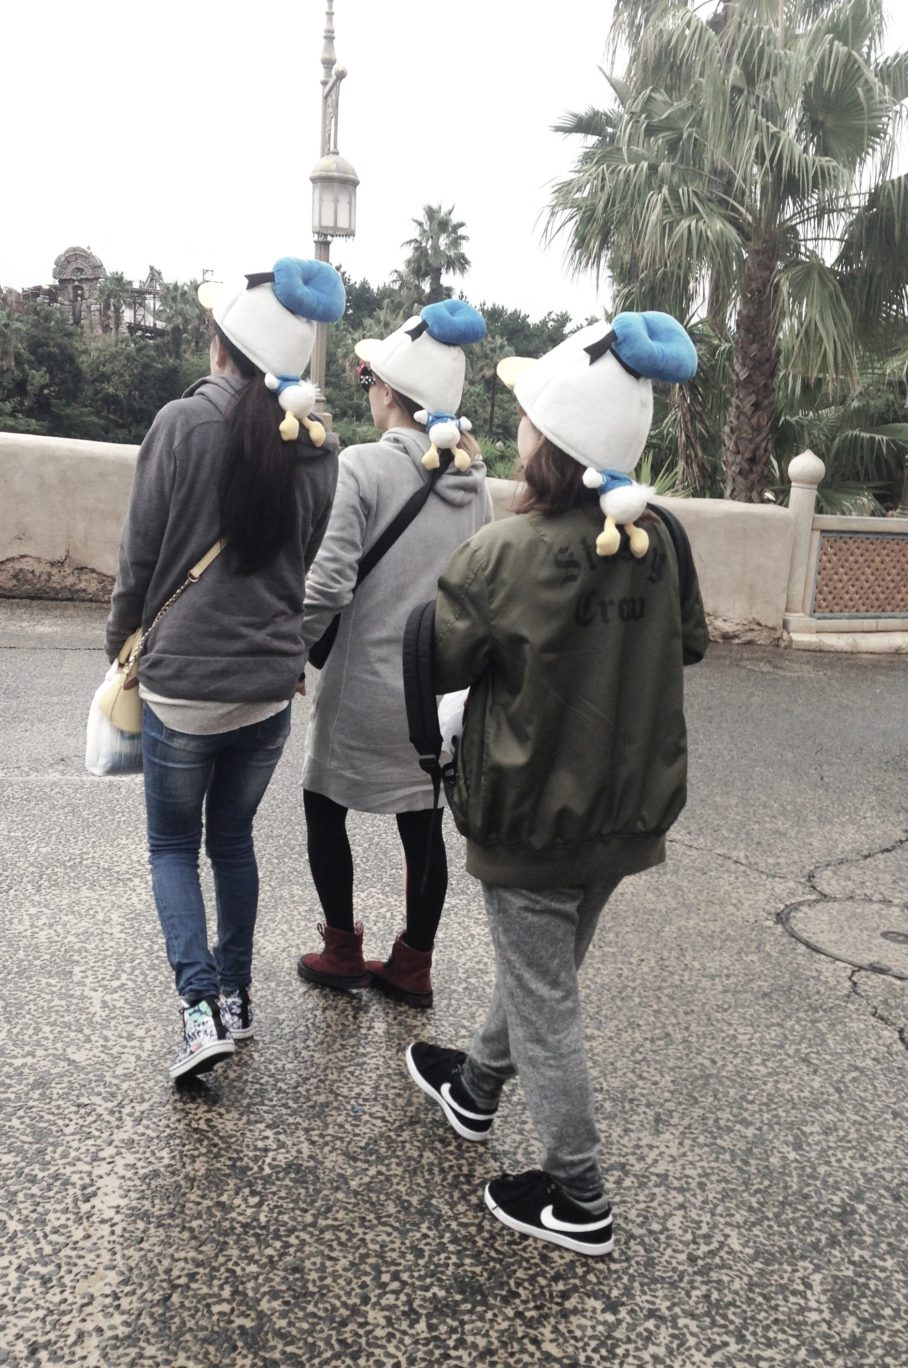 Kawaii Tokyo Disney Sea Tokyo Disney Sea Tokyo Disneyland Matching Outfits Tokyo, Japan Cute 12